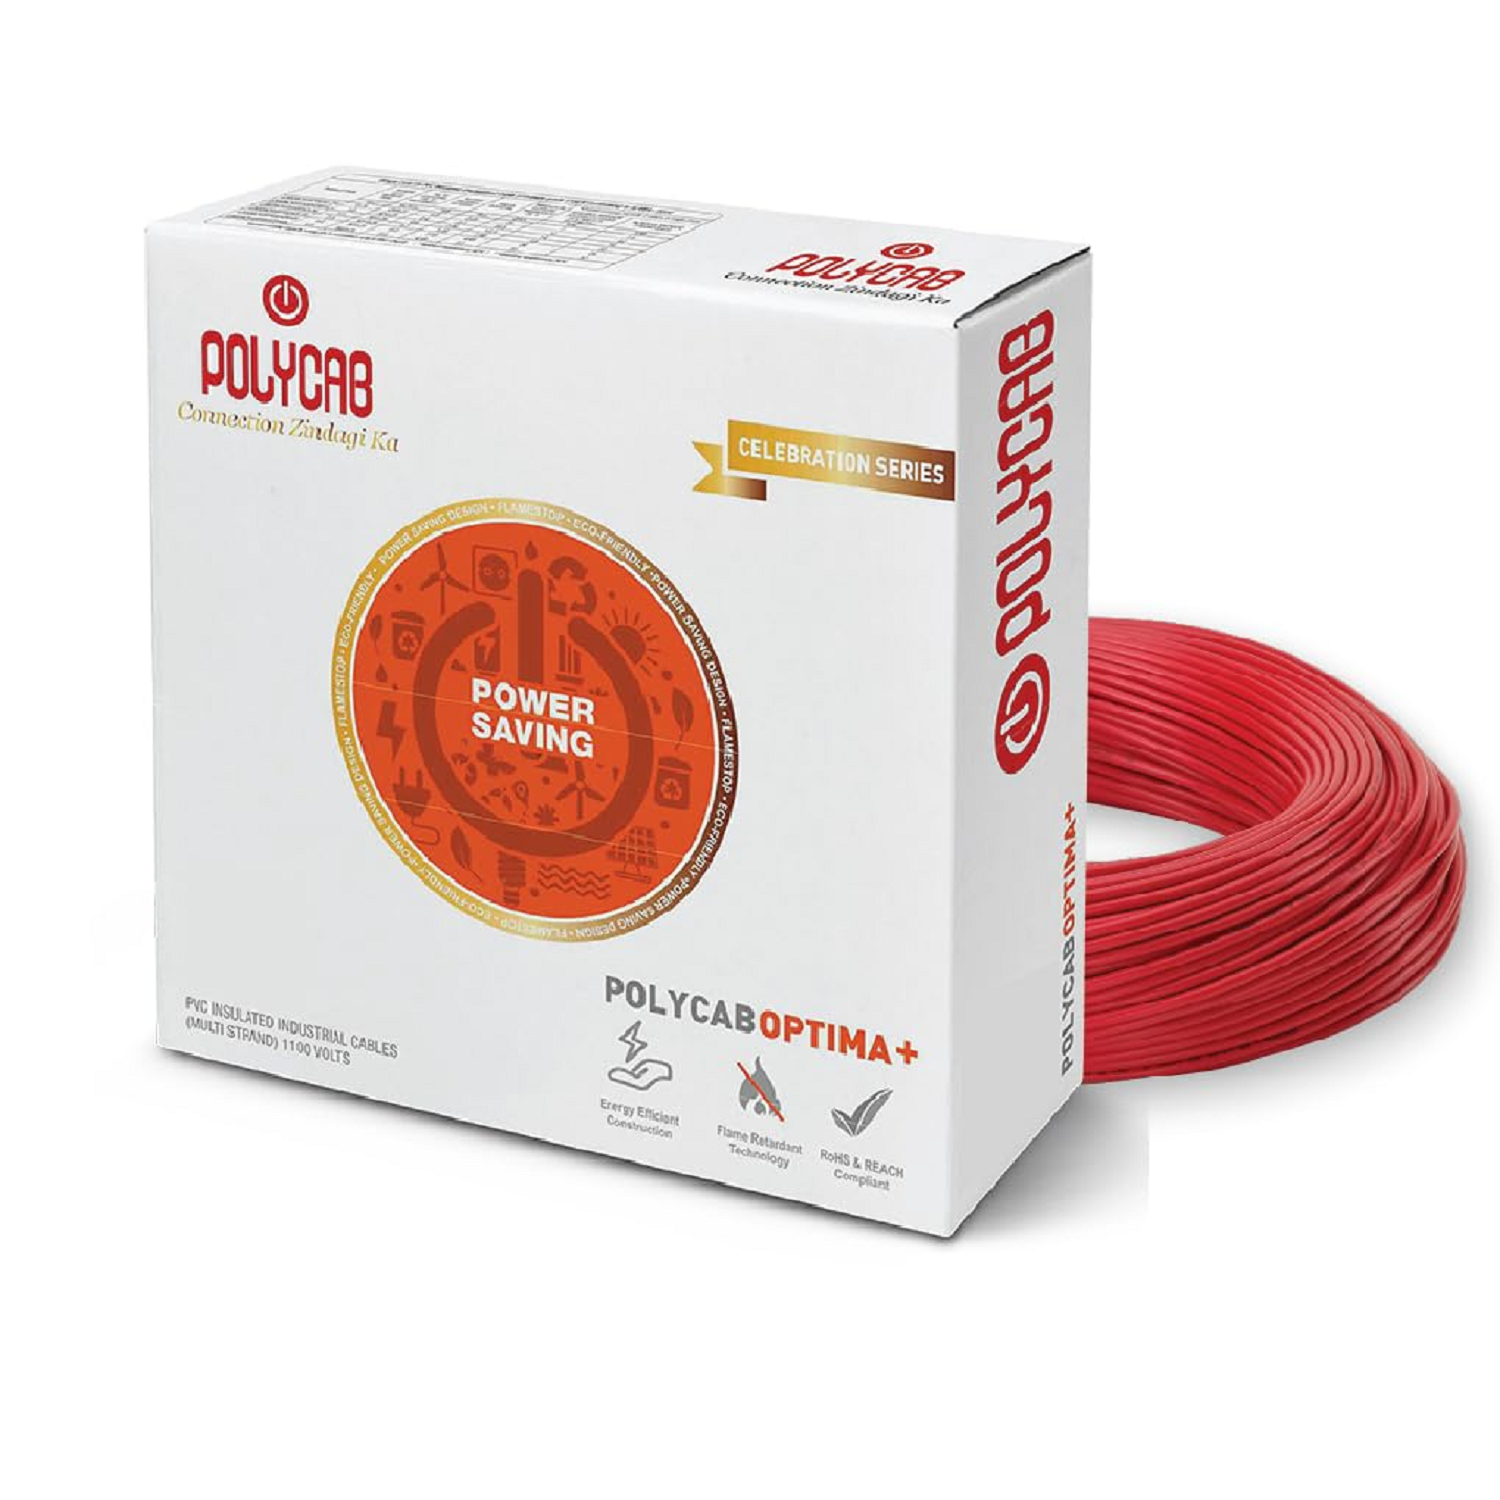 Polycab Optima Plus FR-LF 2.5 SQ-MM, 90 Meters PVC Insulated Copper Wire Single Core (Red)